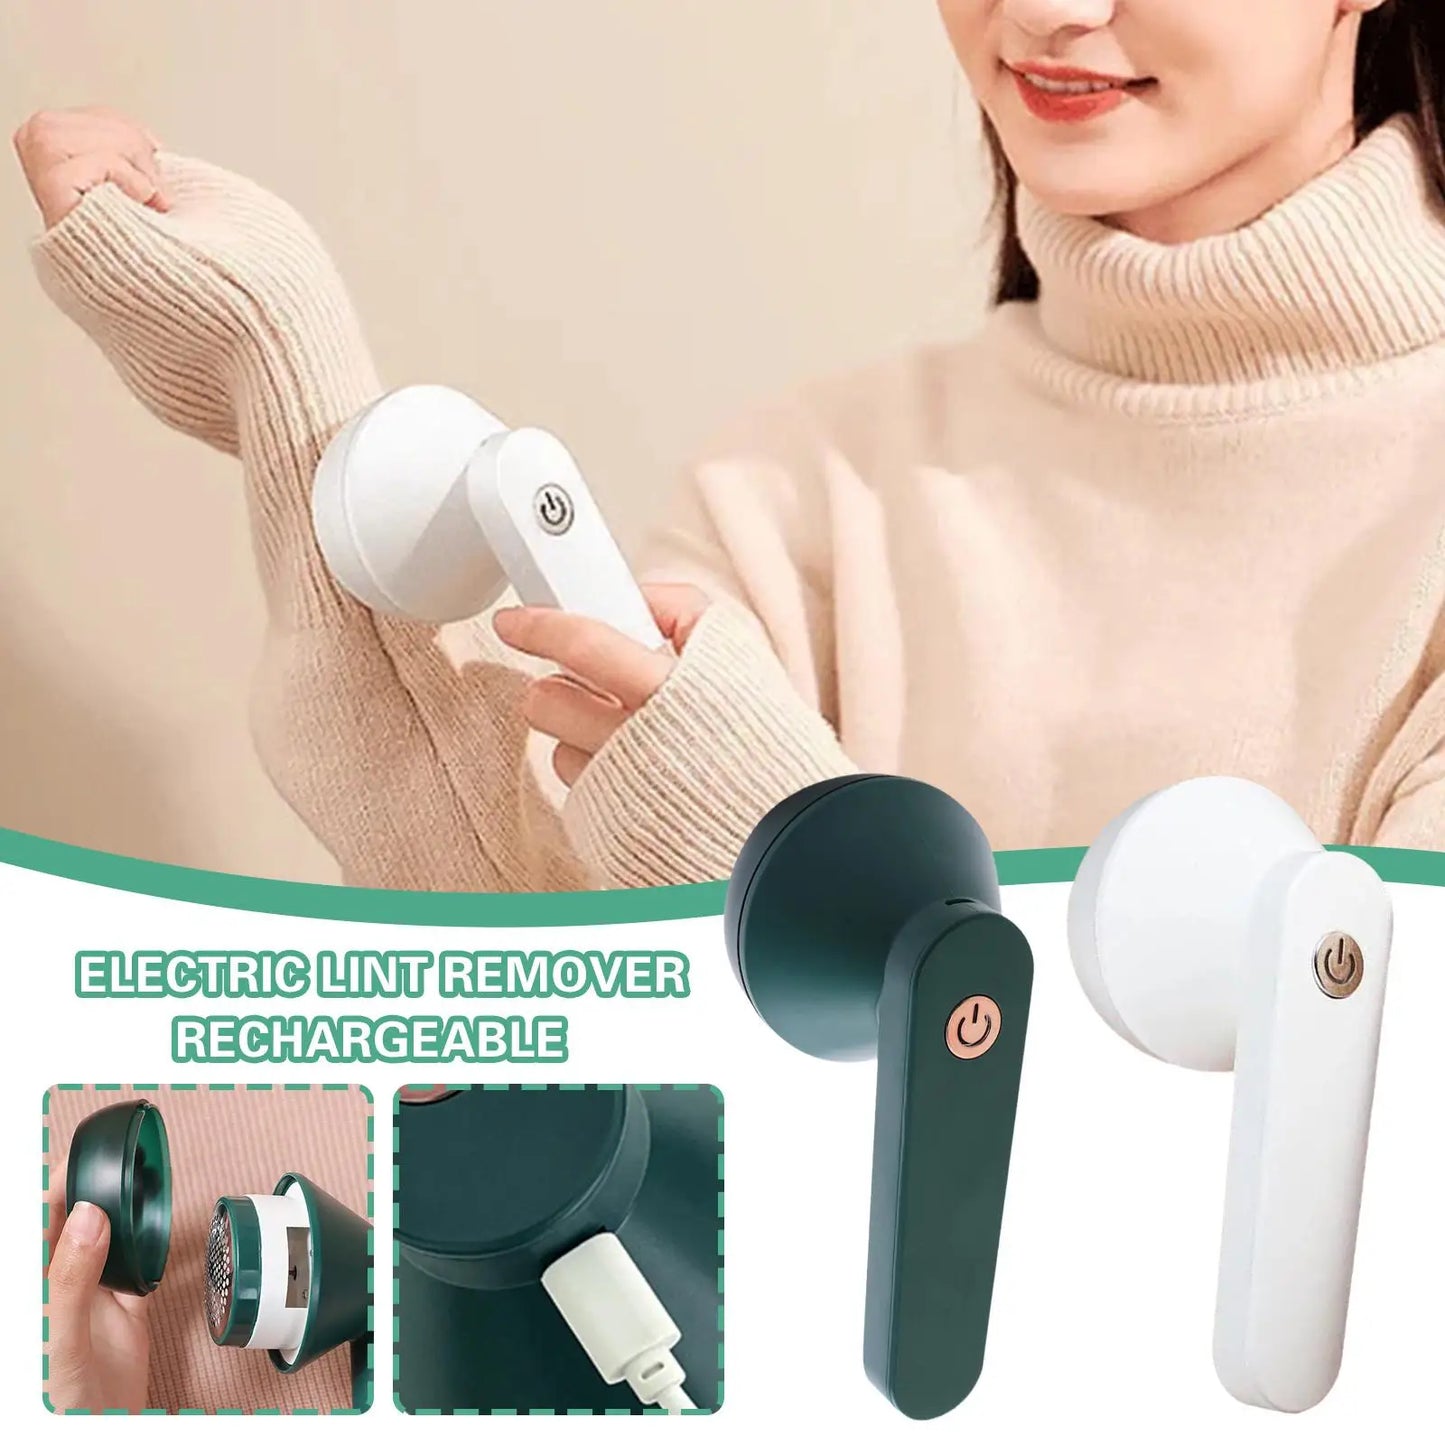 Electric Lint Remover Rechargeable for Clothing Fuzz Remover Sweater Shaver Coat Hair Ball Trimmer Plush Clothing Razor Remover